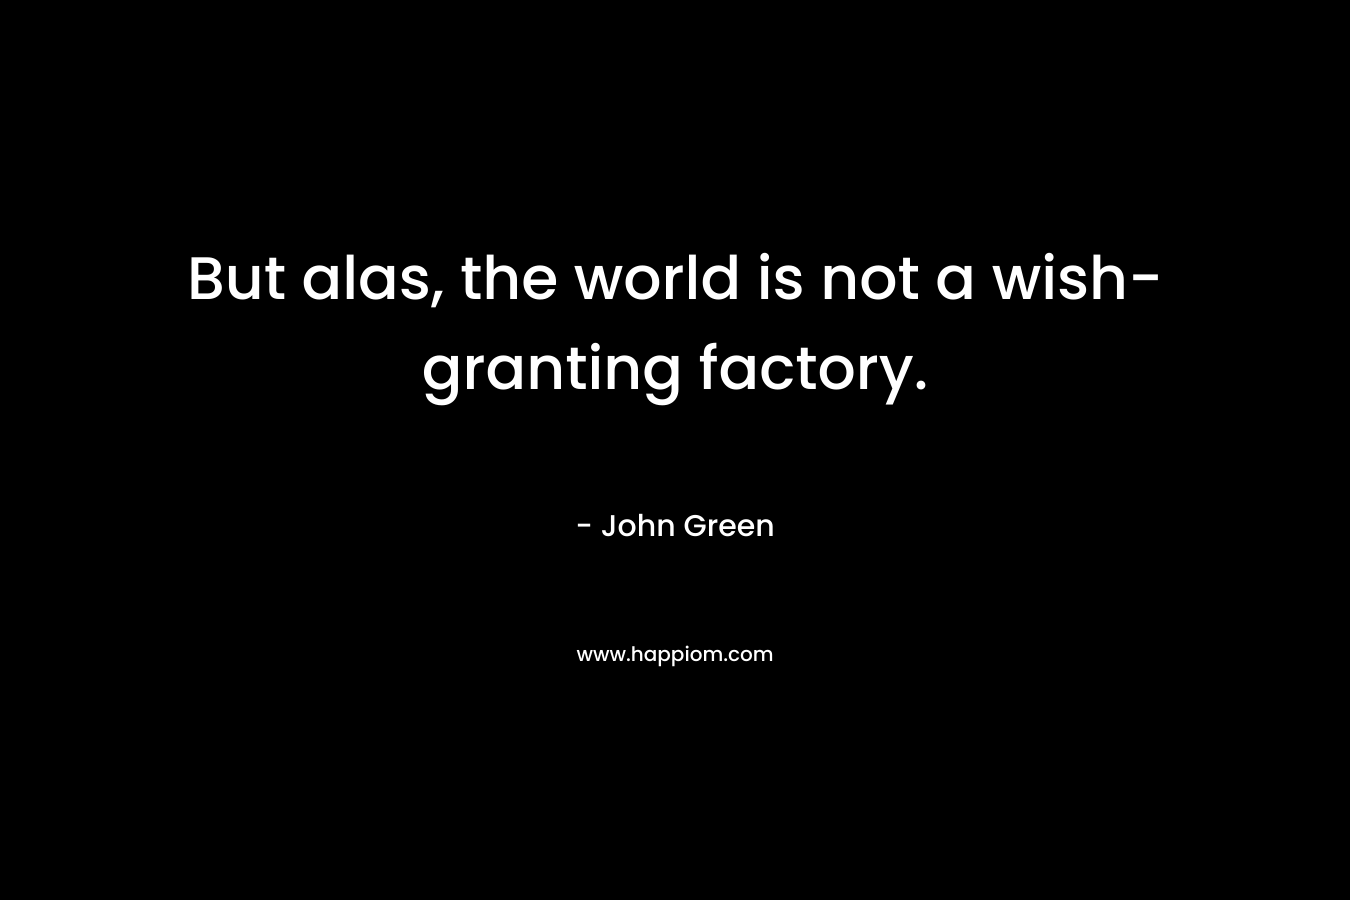 But alas, the world is not a wish-granting factory.